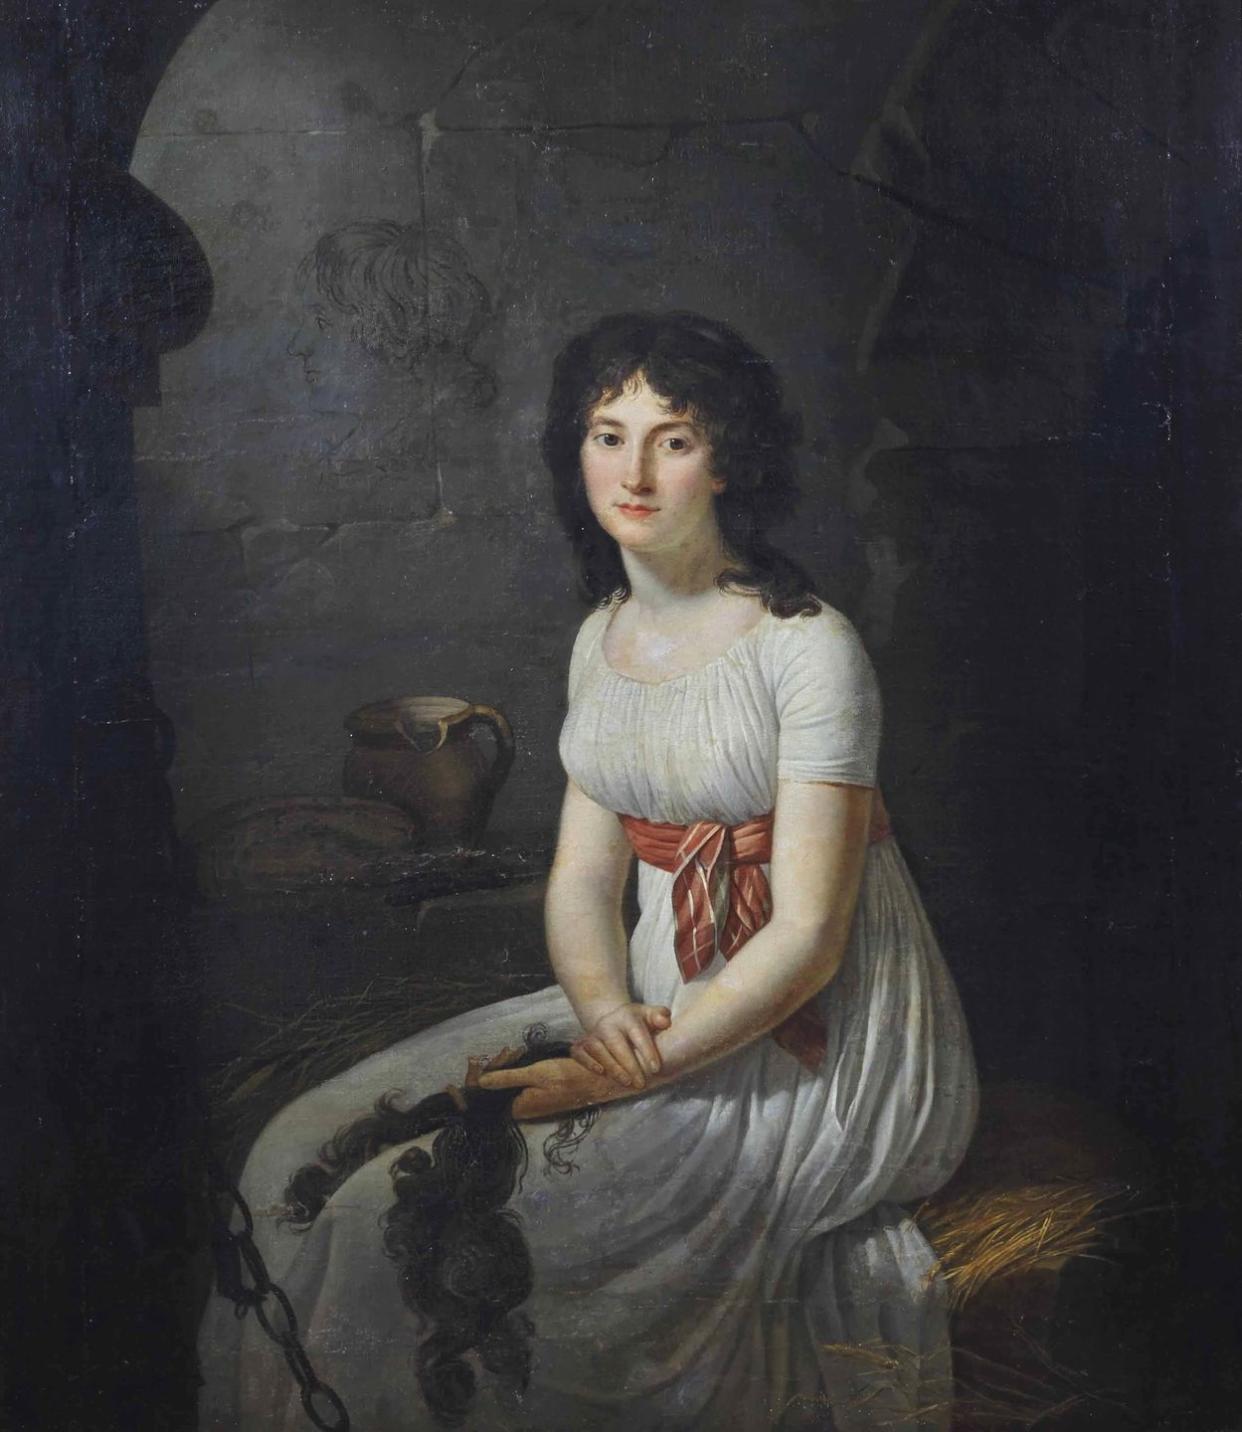 terezia talien painted by jean louis laneuville after the french revolution